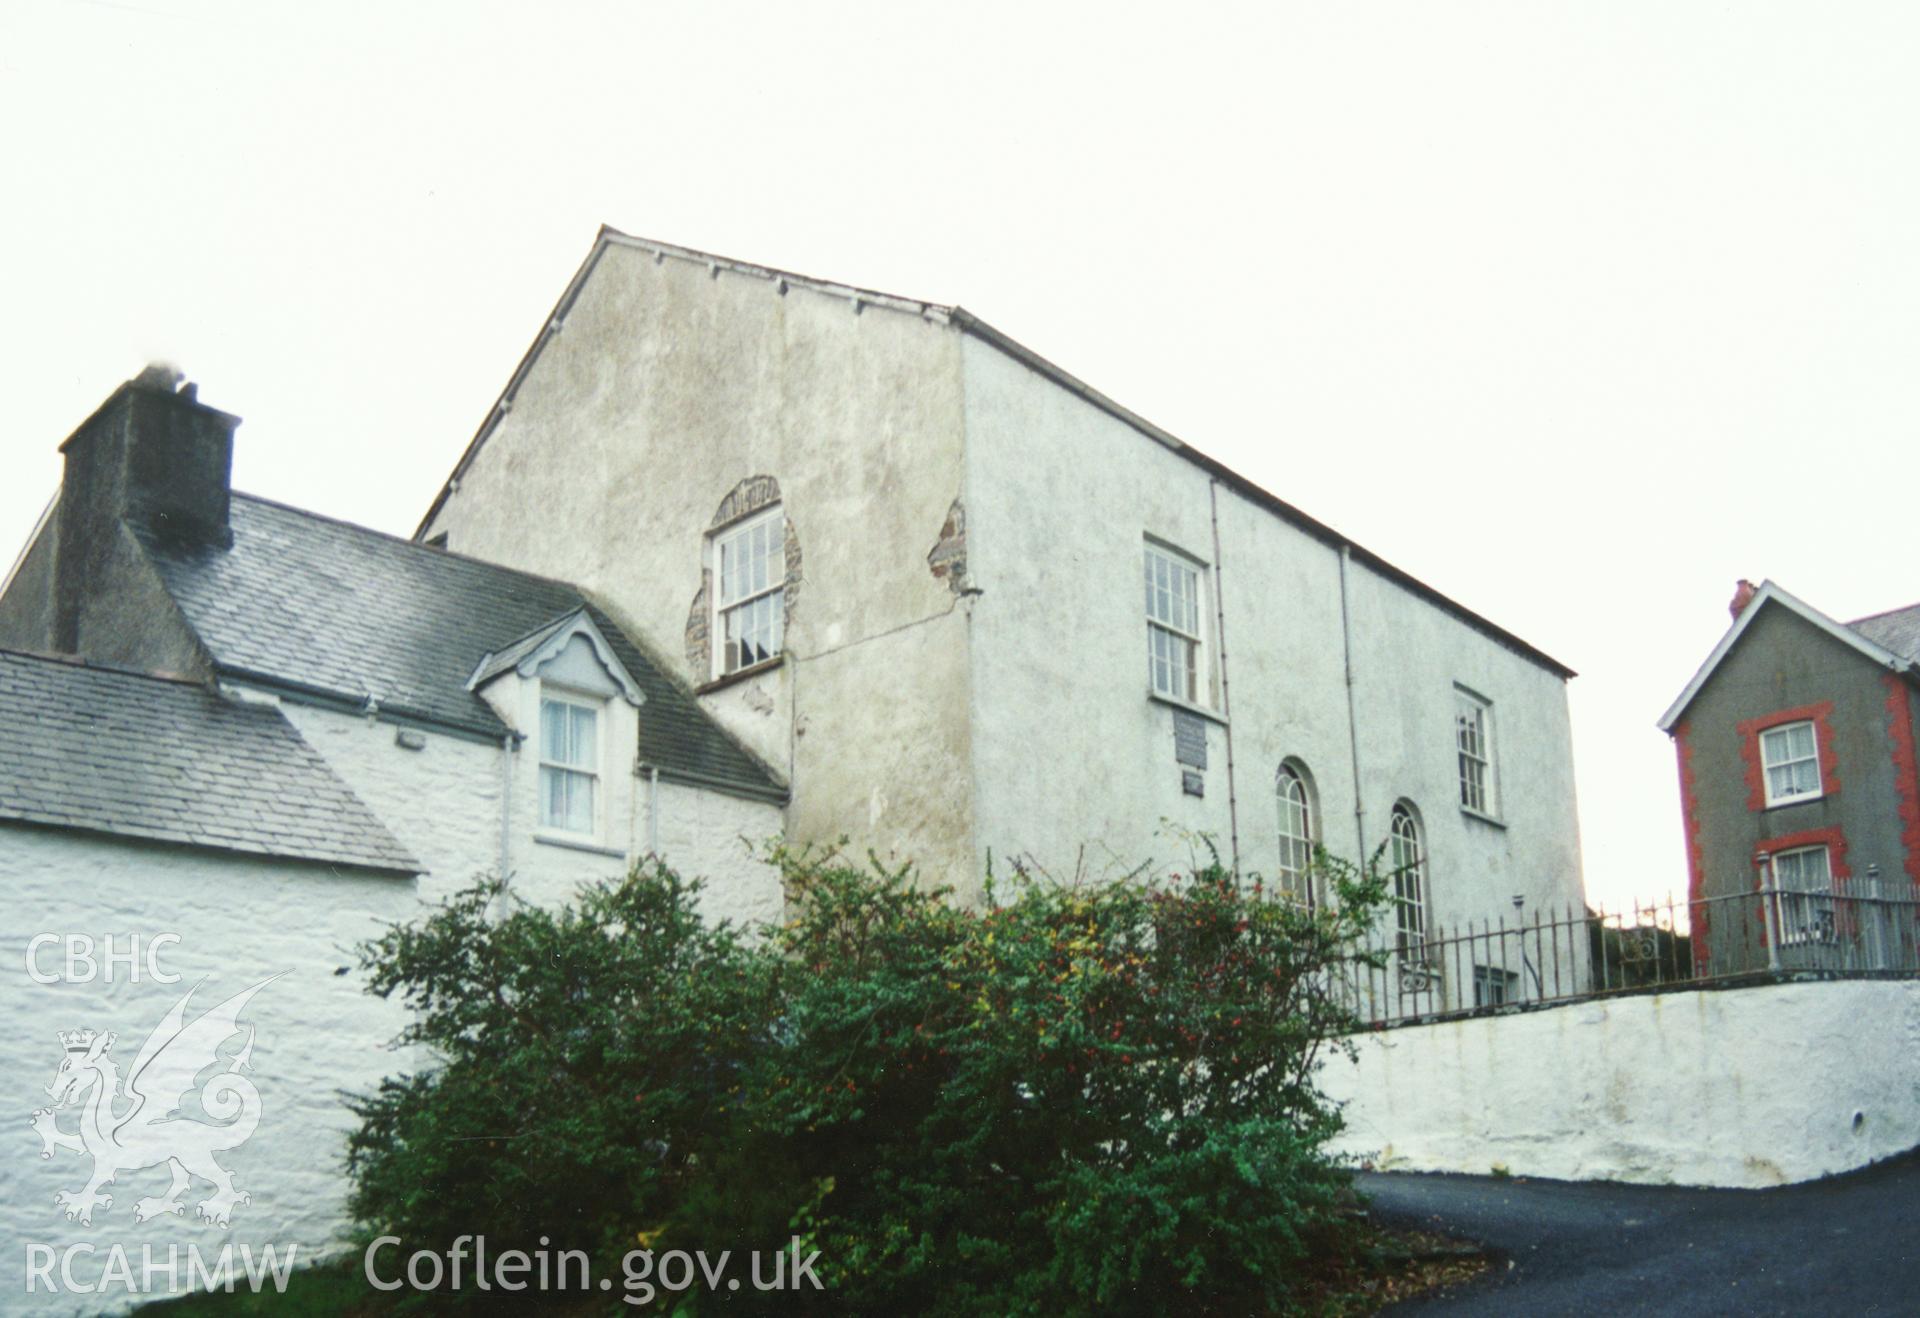 Digital copy of a colour photograph showing an exterior view of the Rhiw-bwys Welsh Calvinistic Methodist Chapel,  taken by Robert Scourfield, c.1996.